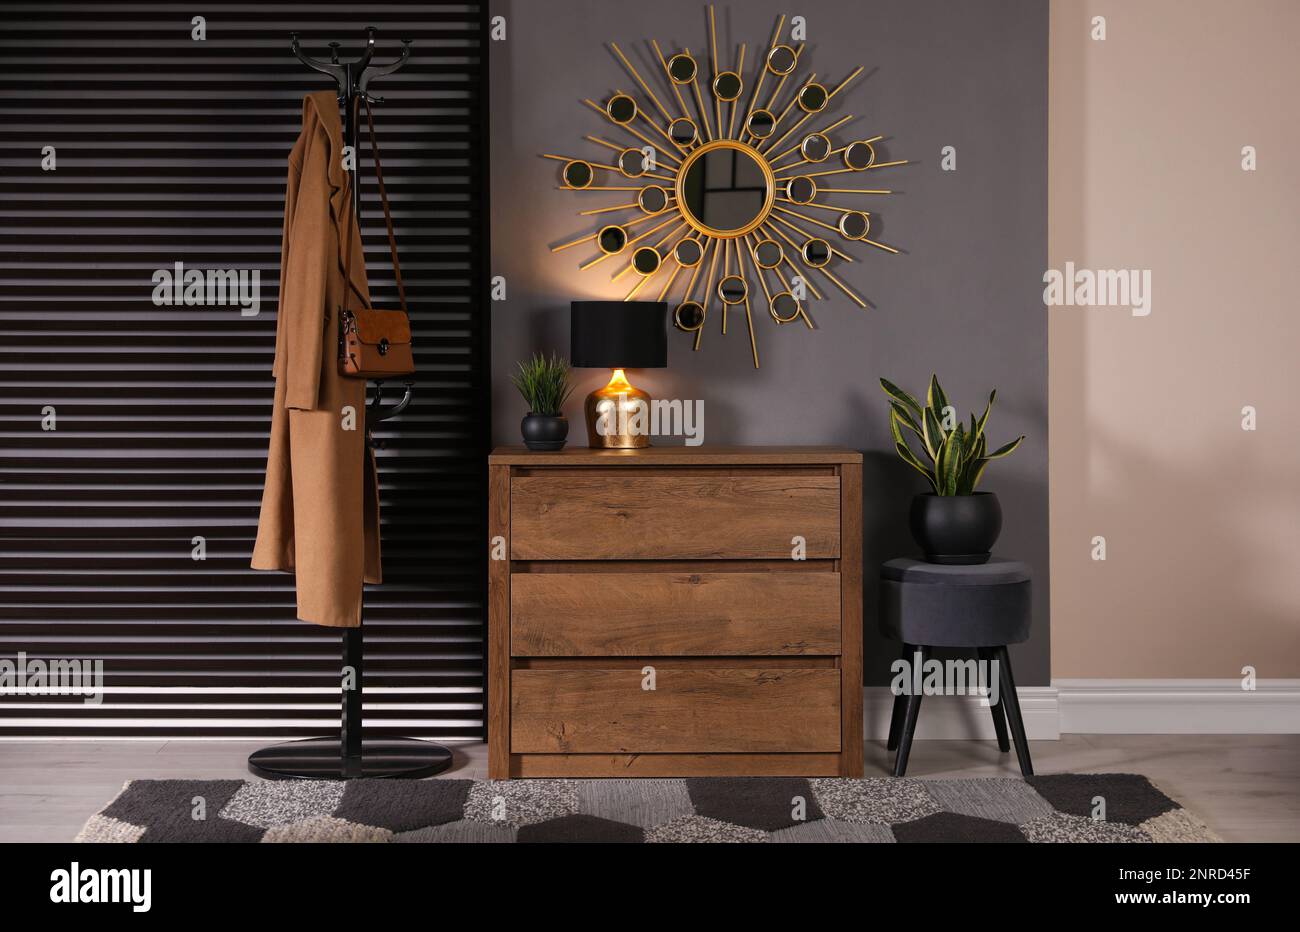 Wooden chest of drawers with decor, coat stand and mirror in hallway. Interior design Stock Photo